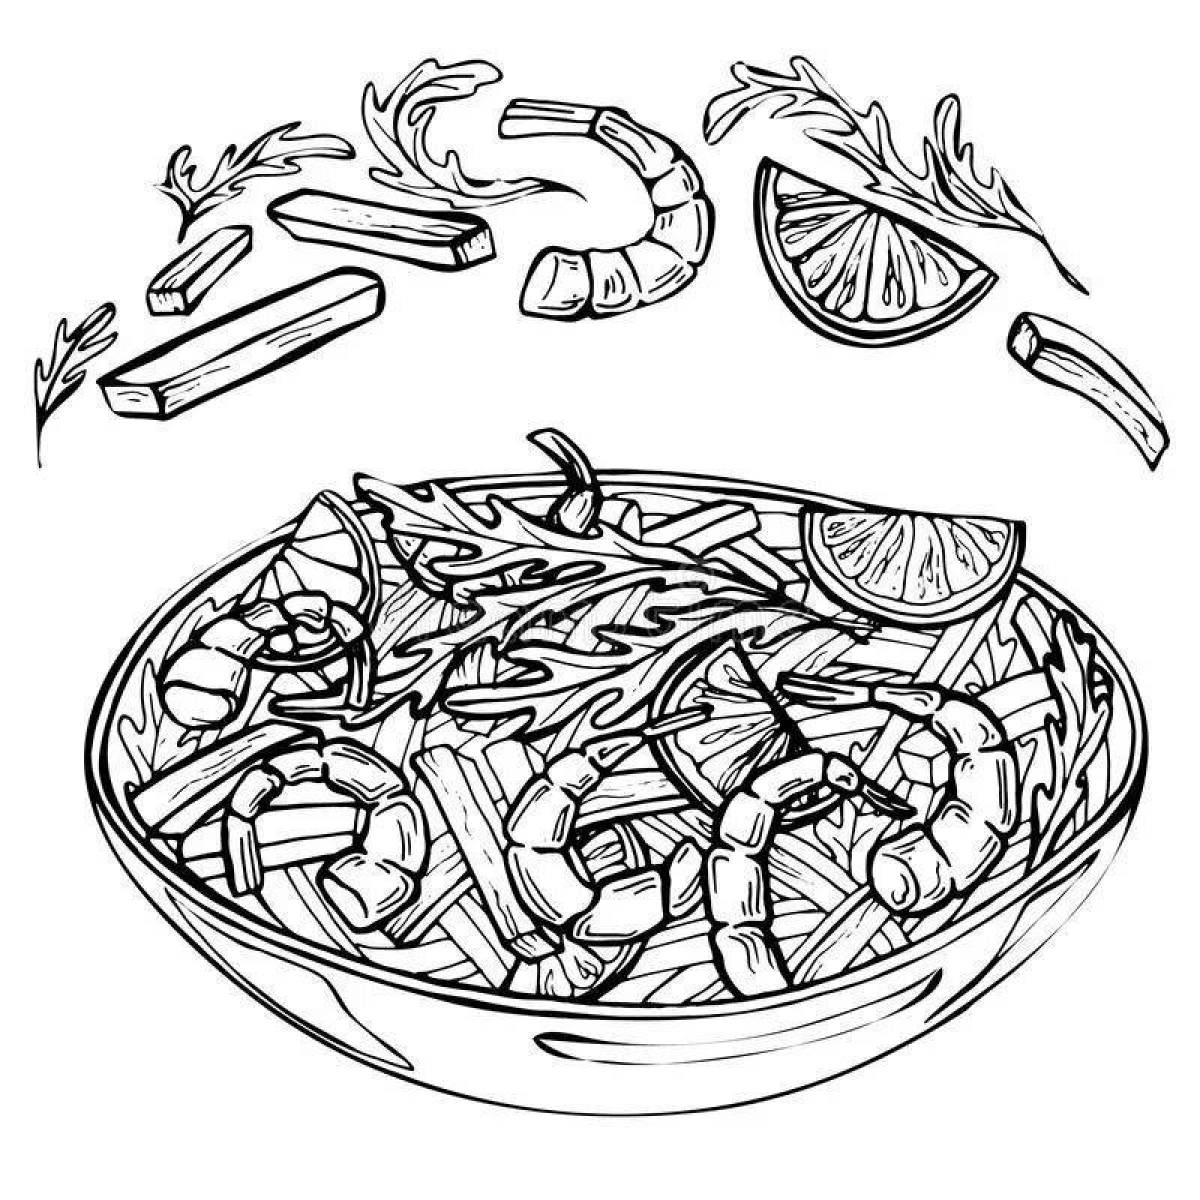 Caesar salad coloring page welcome